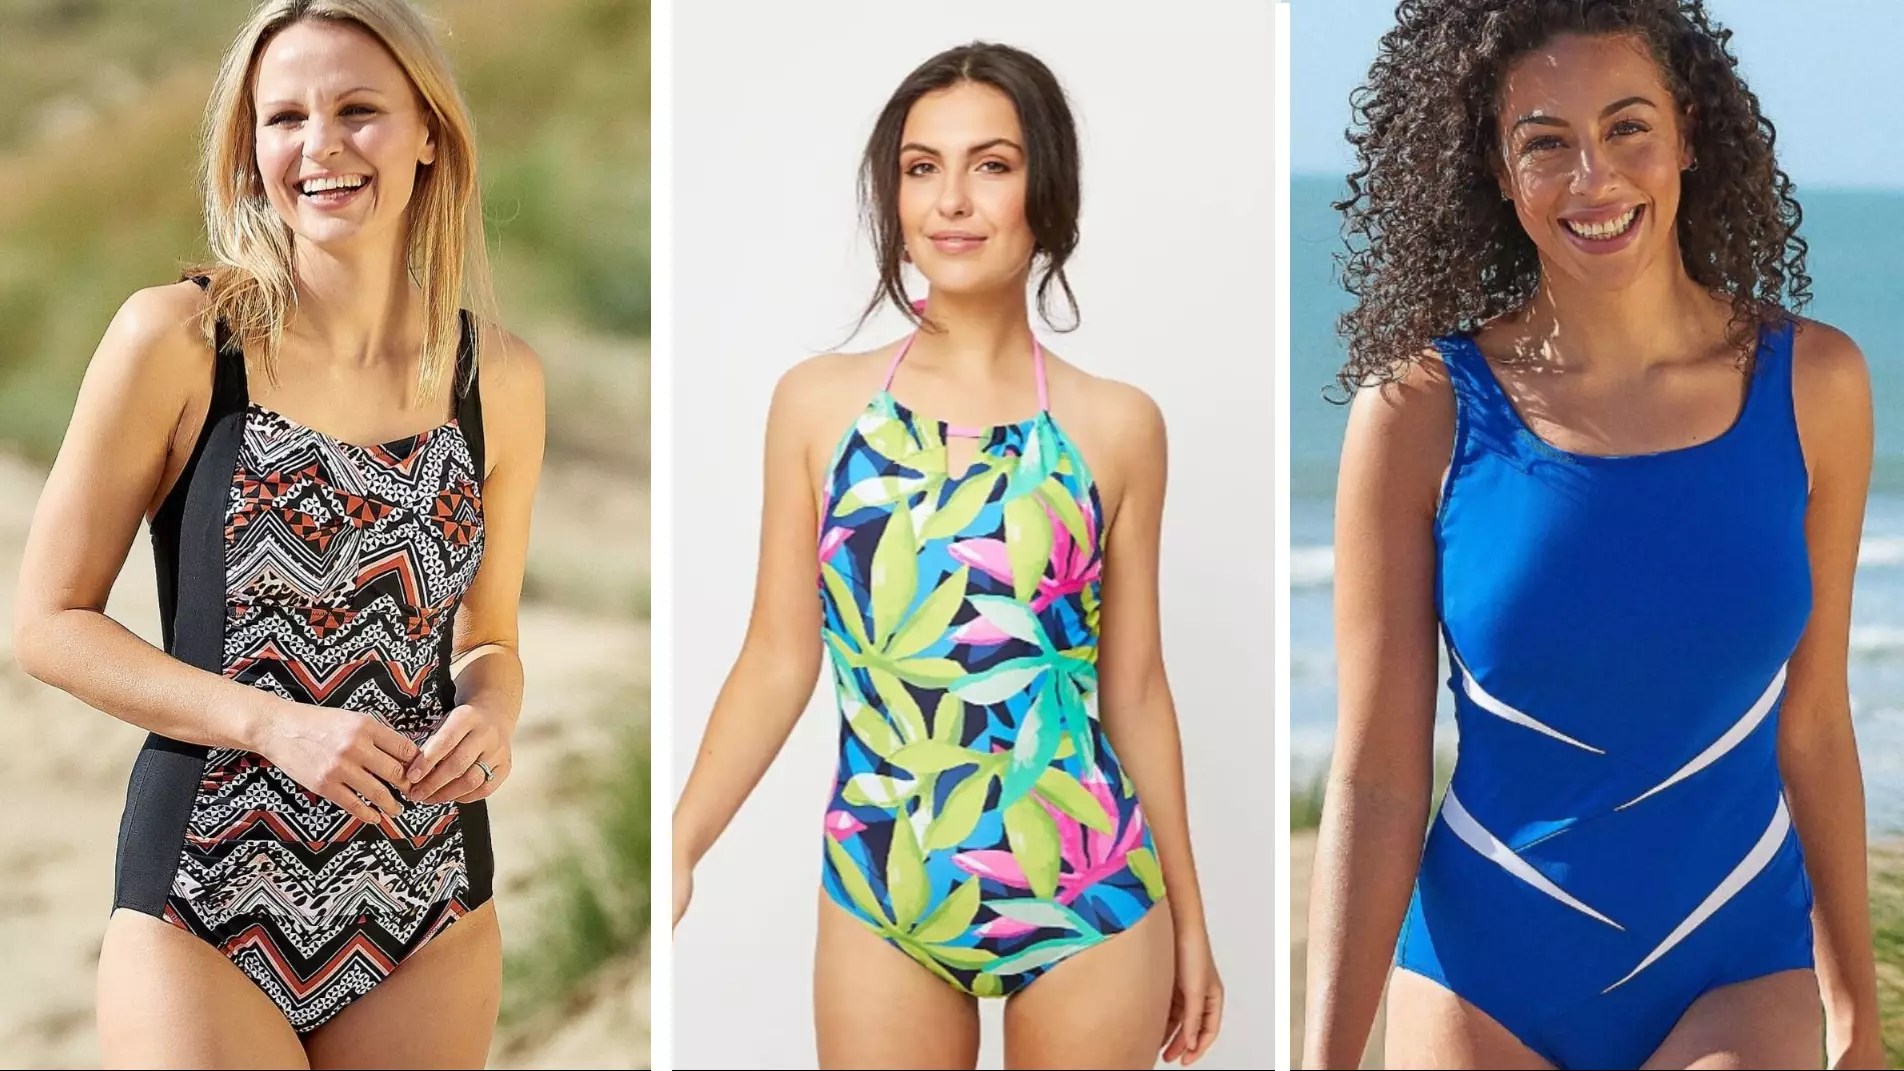 We’ve Rounded Up The Best Post-Surgery Swimwear For Breast Cancer Awareness Month